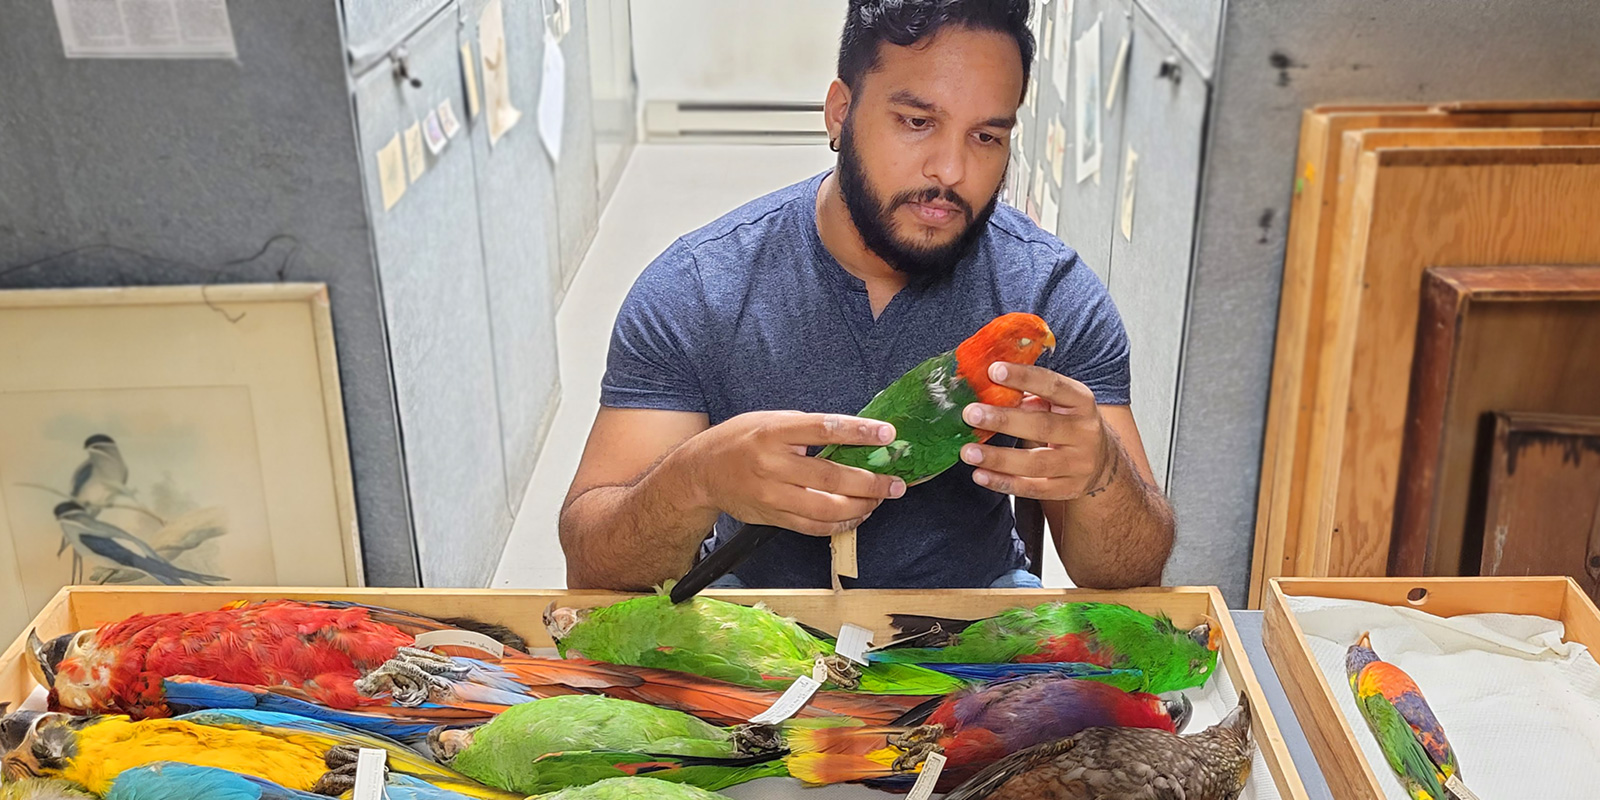 Man looking at colorful bird specimens